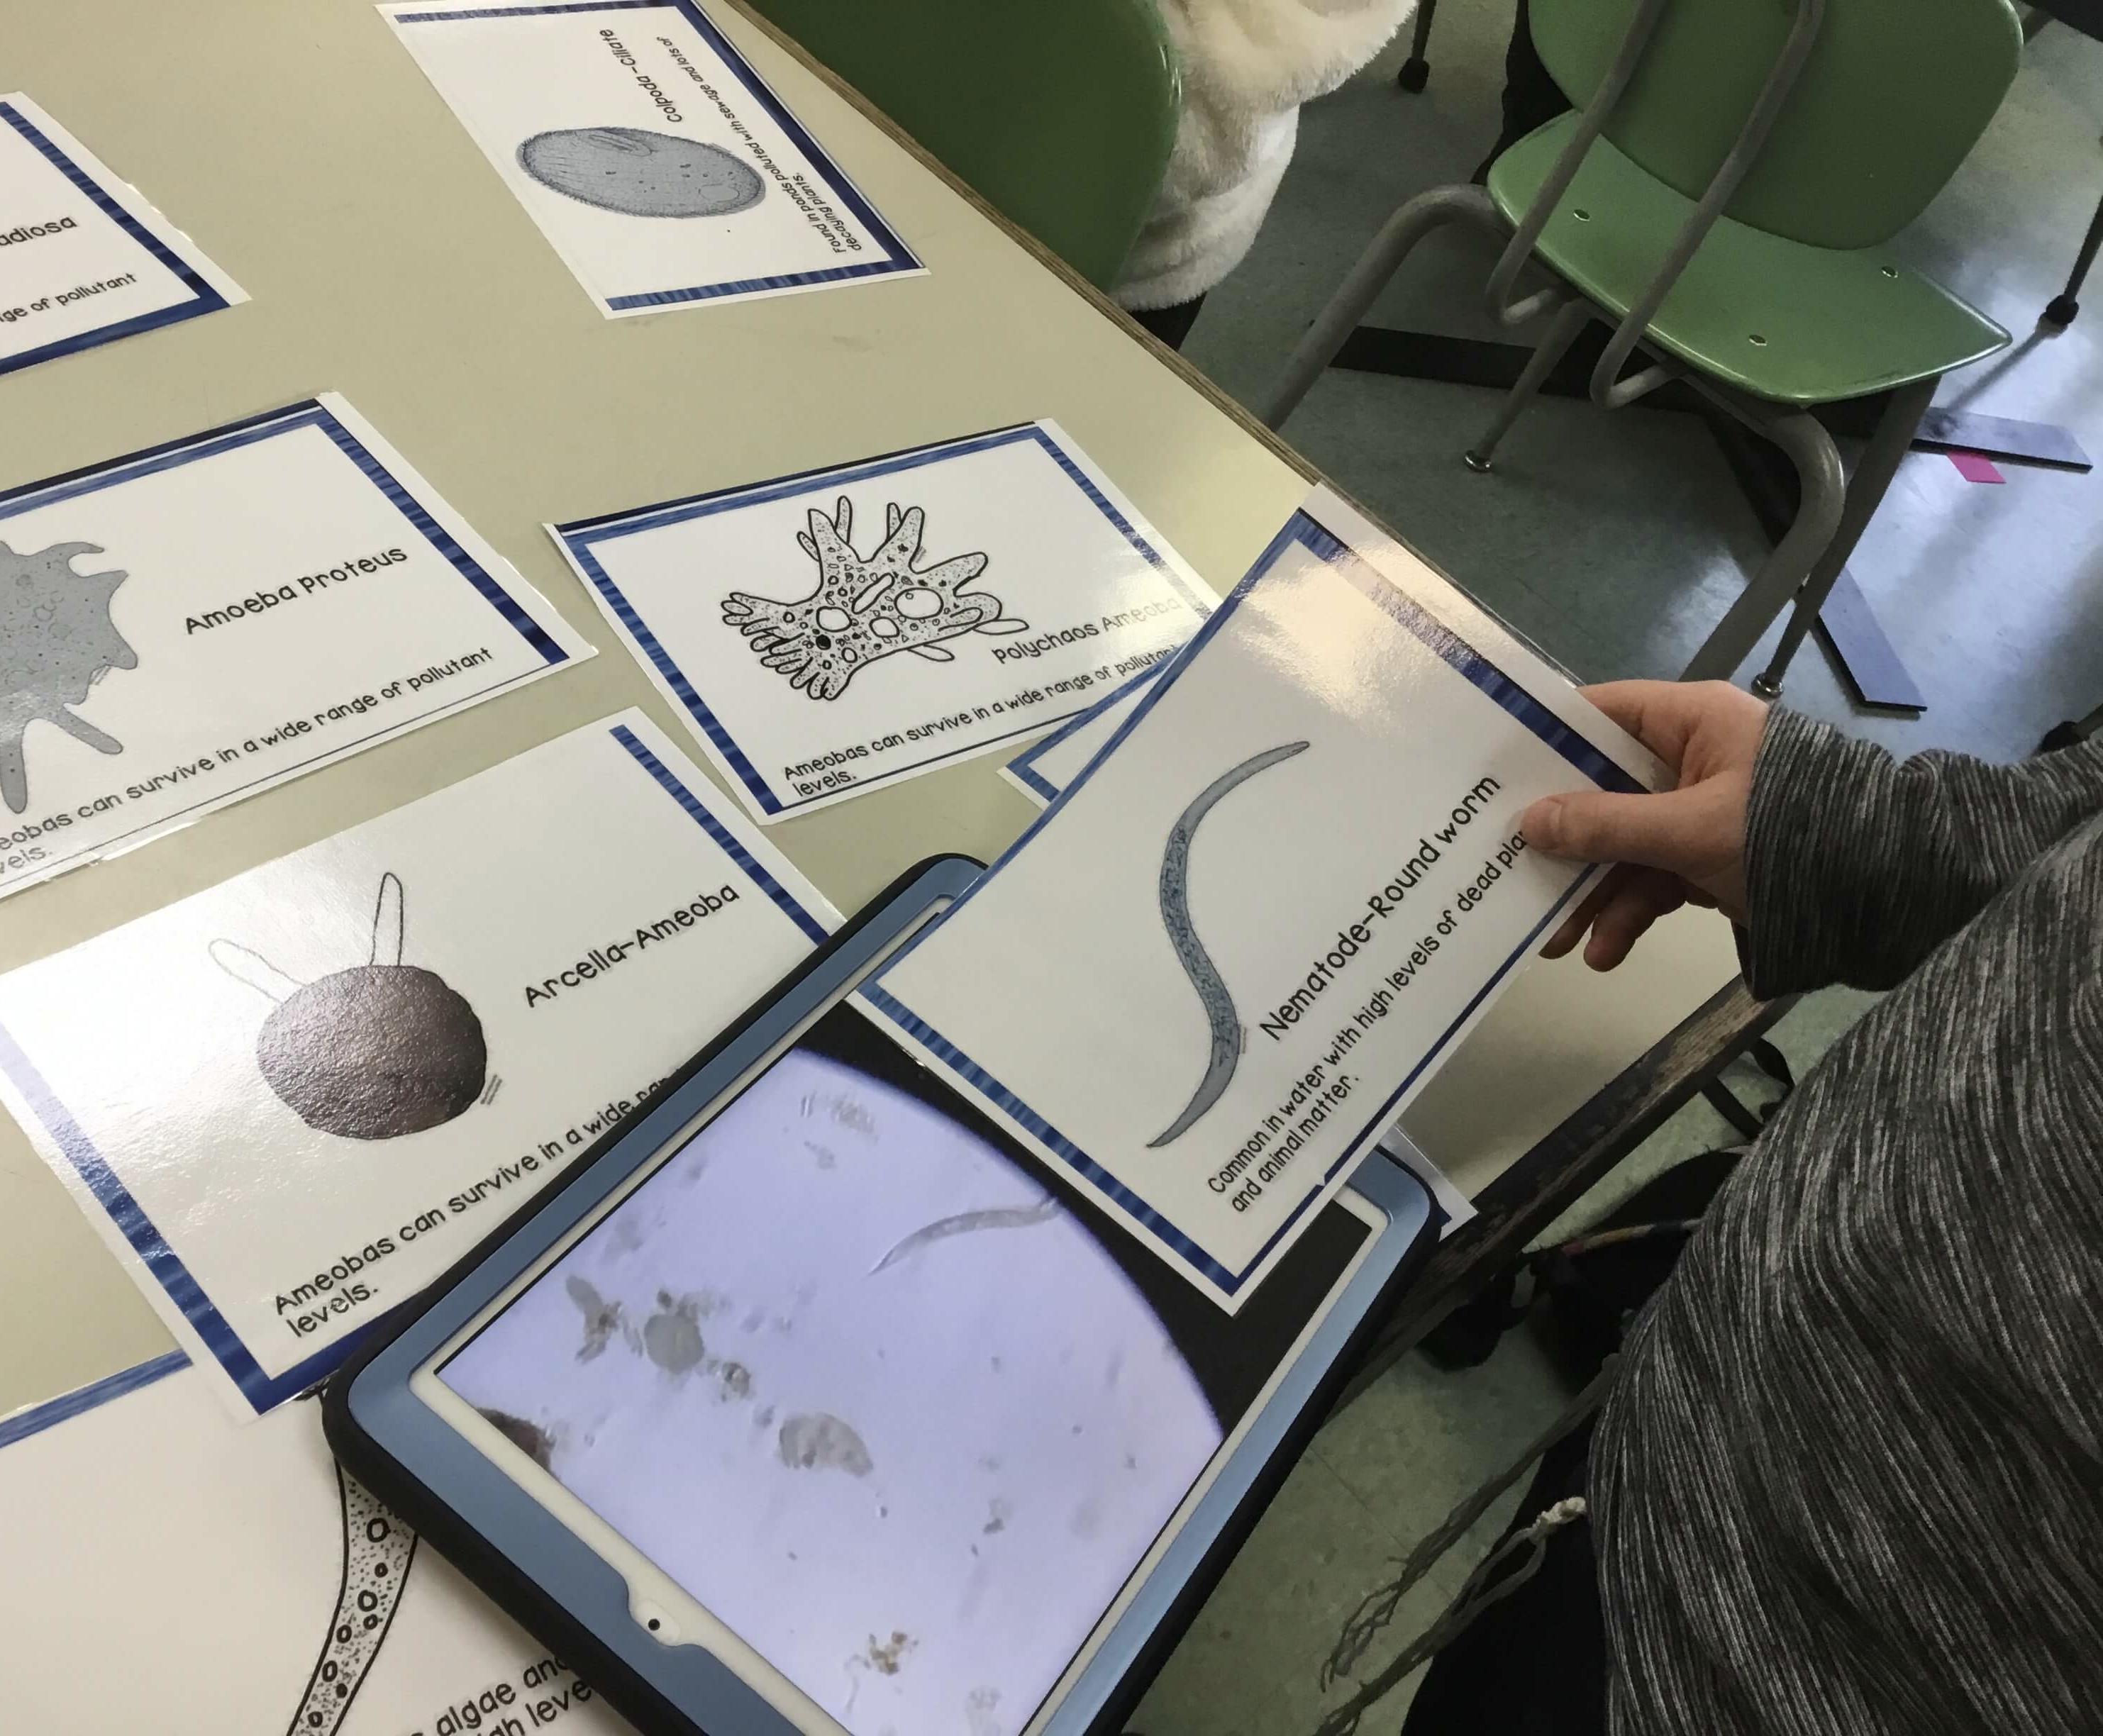 Identifying microorganisms reference cards